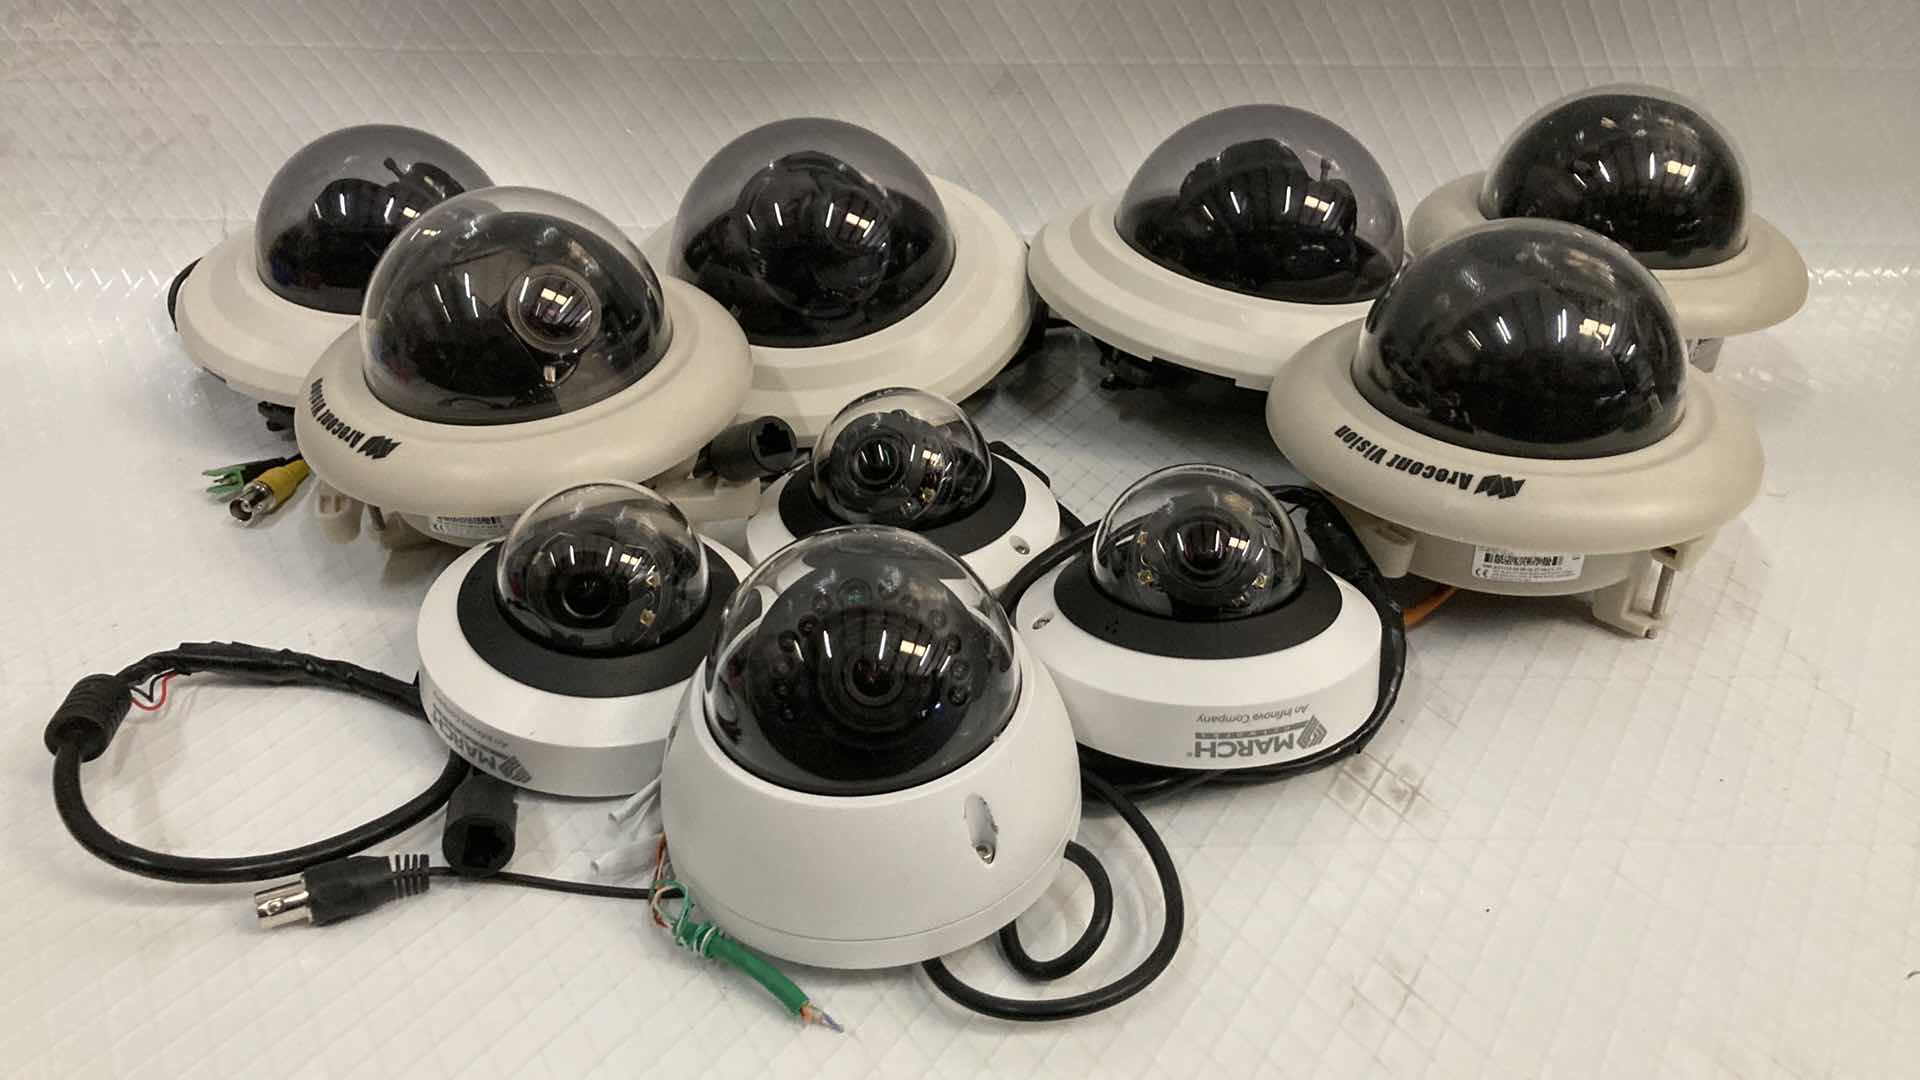 Photo 1 of DOME SECURITY CAMERAS VARIOUS BRANDS & MODELS (10)